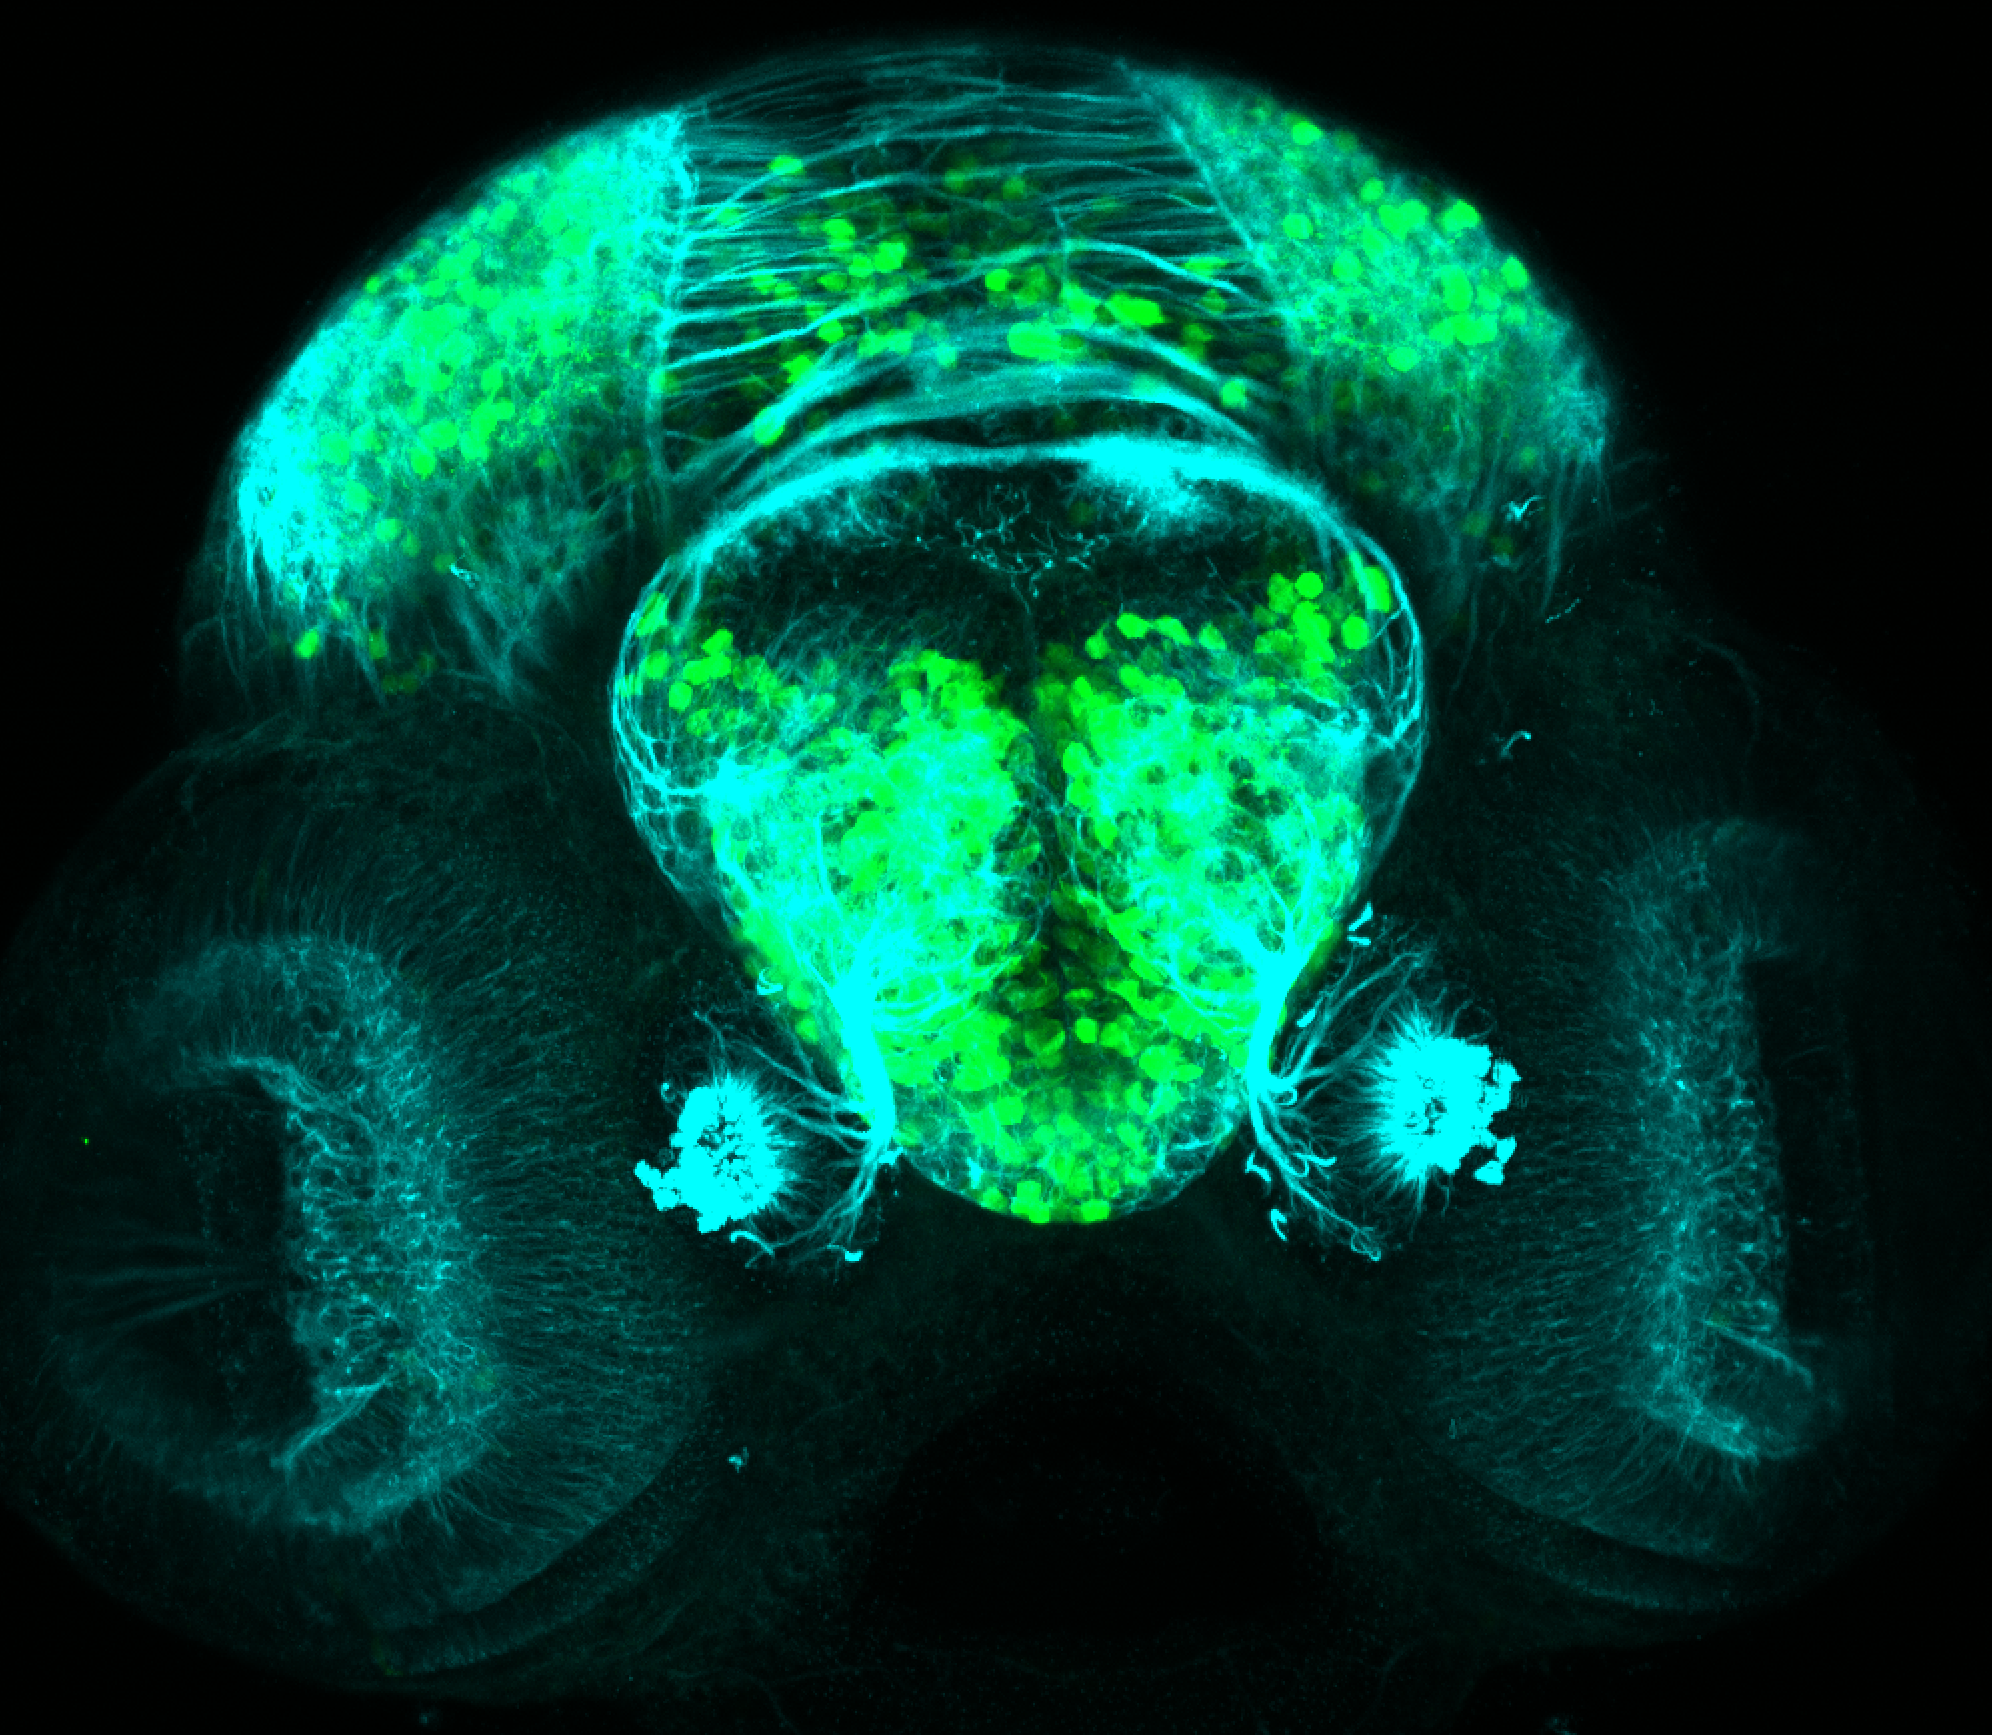 3dpf frontal view of dlx:GFP larvae